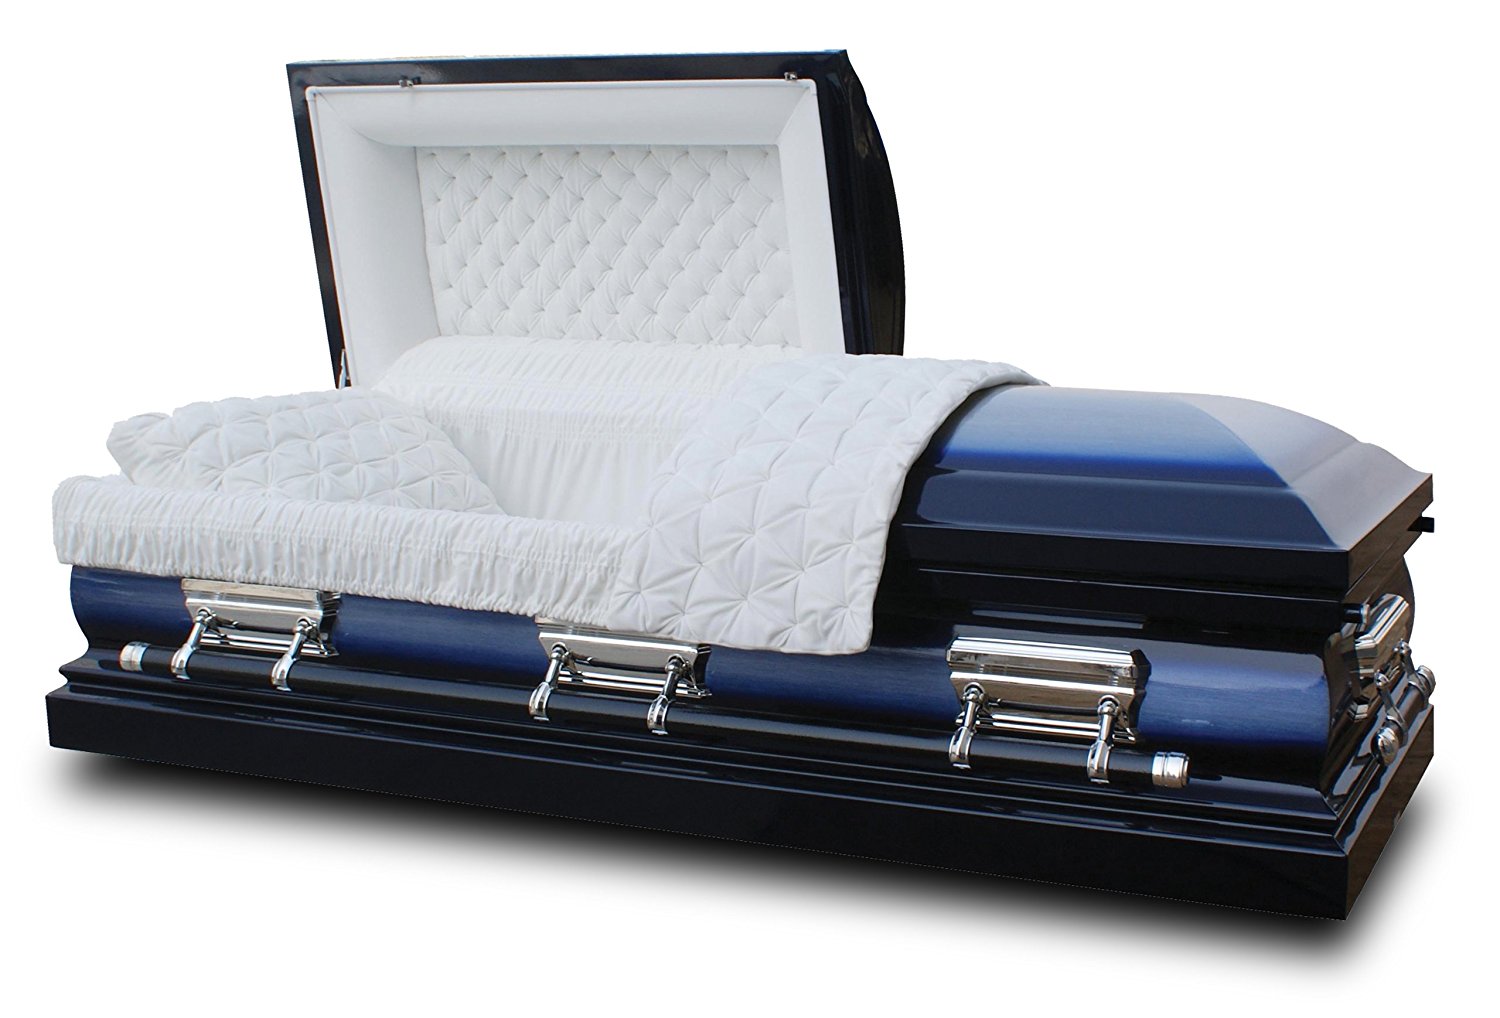 A Look At Caskets For Sale Near Me